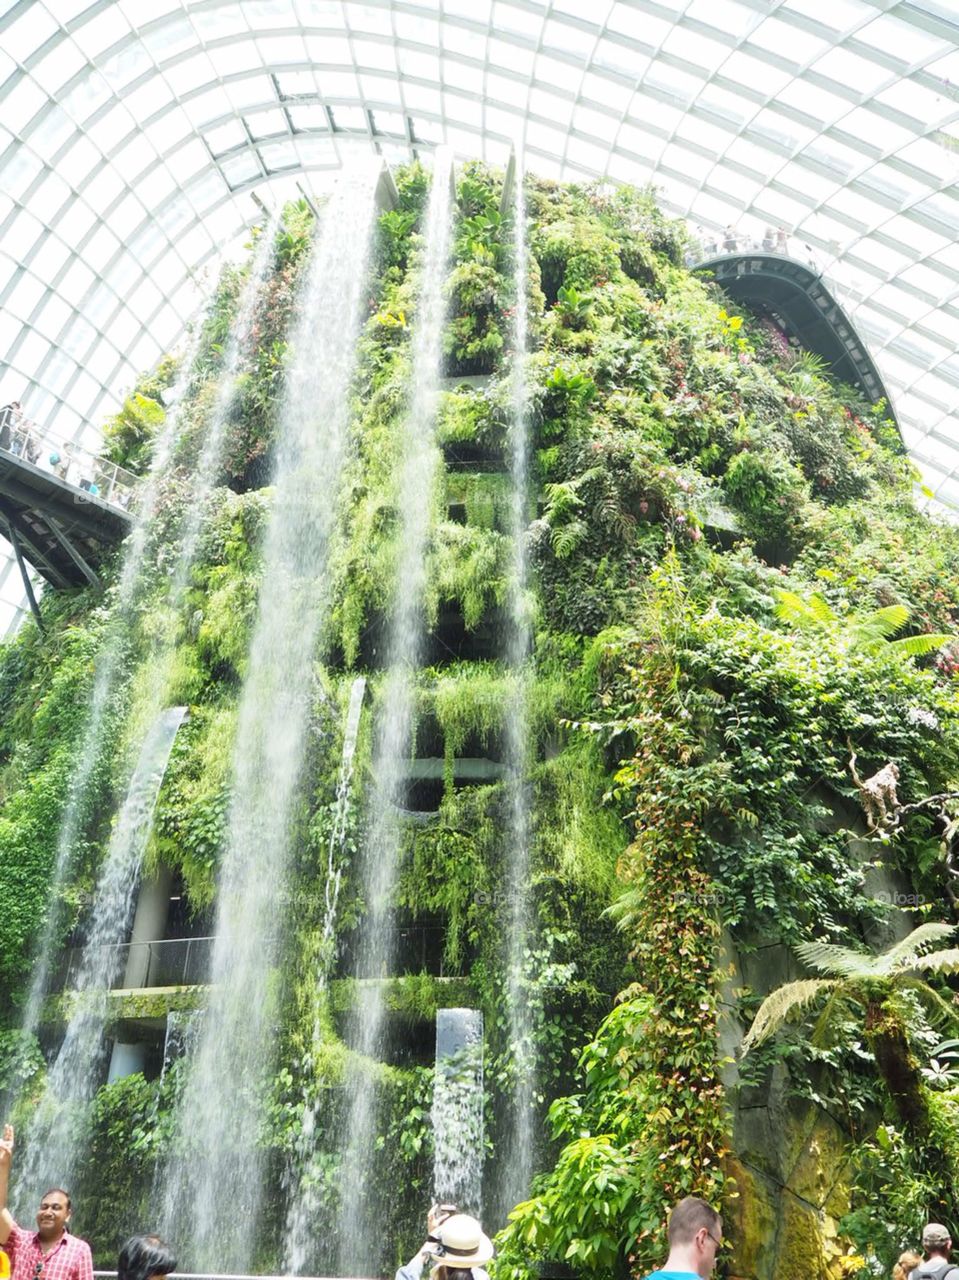 The beauty of the Garden By The Bay Waterfall, Singapore